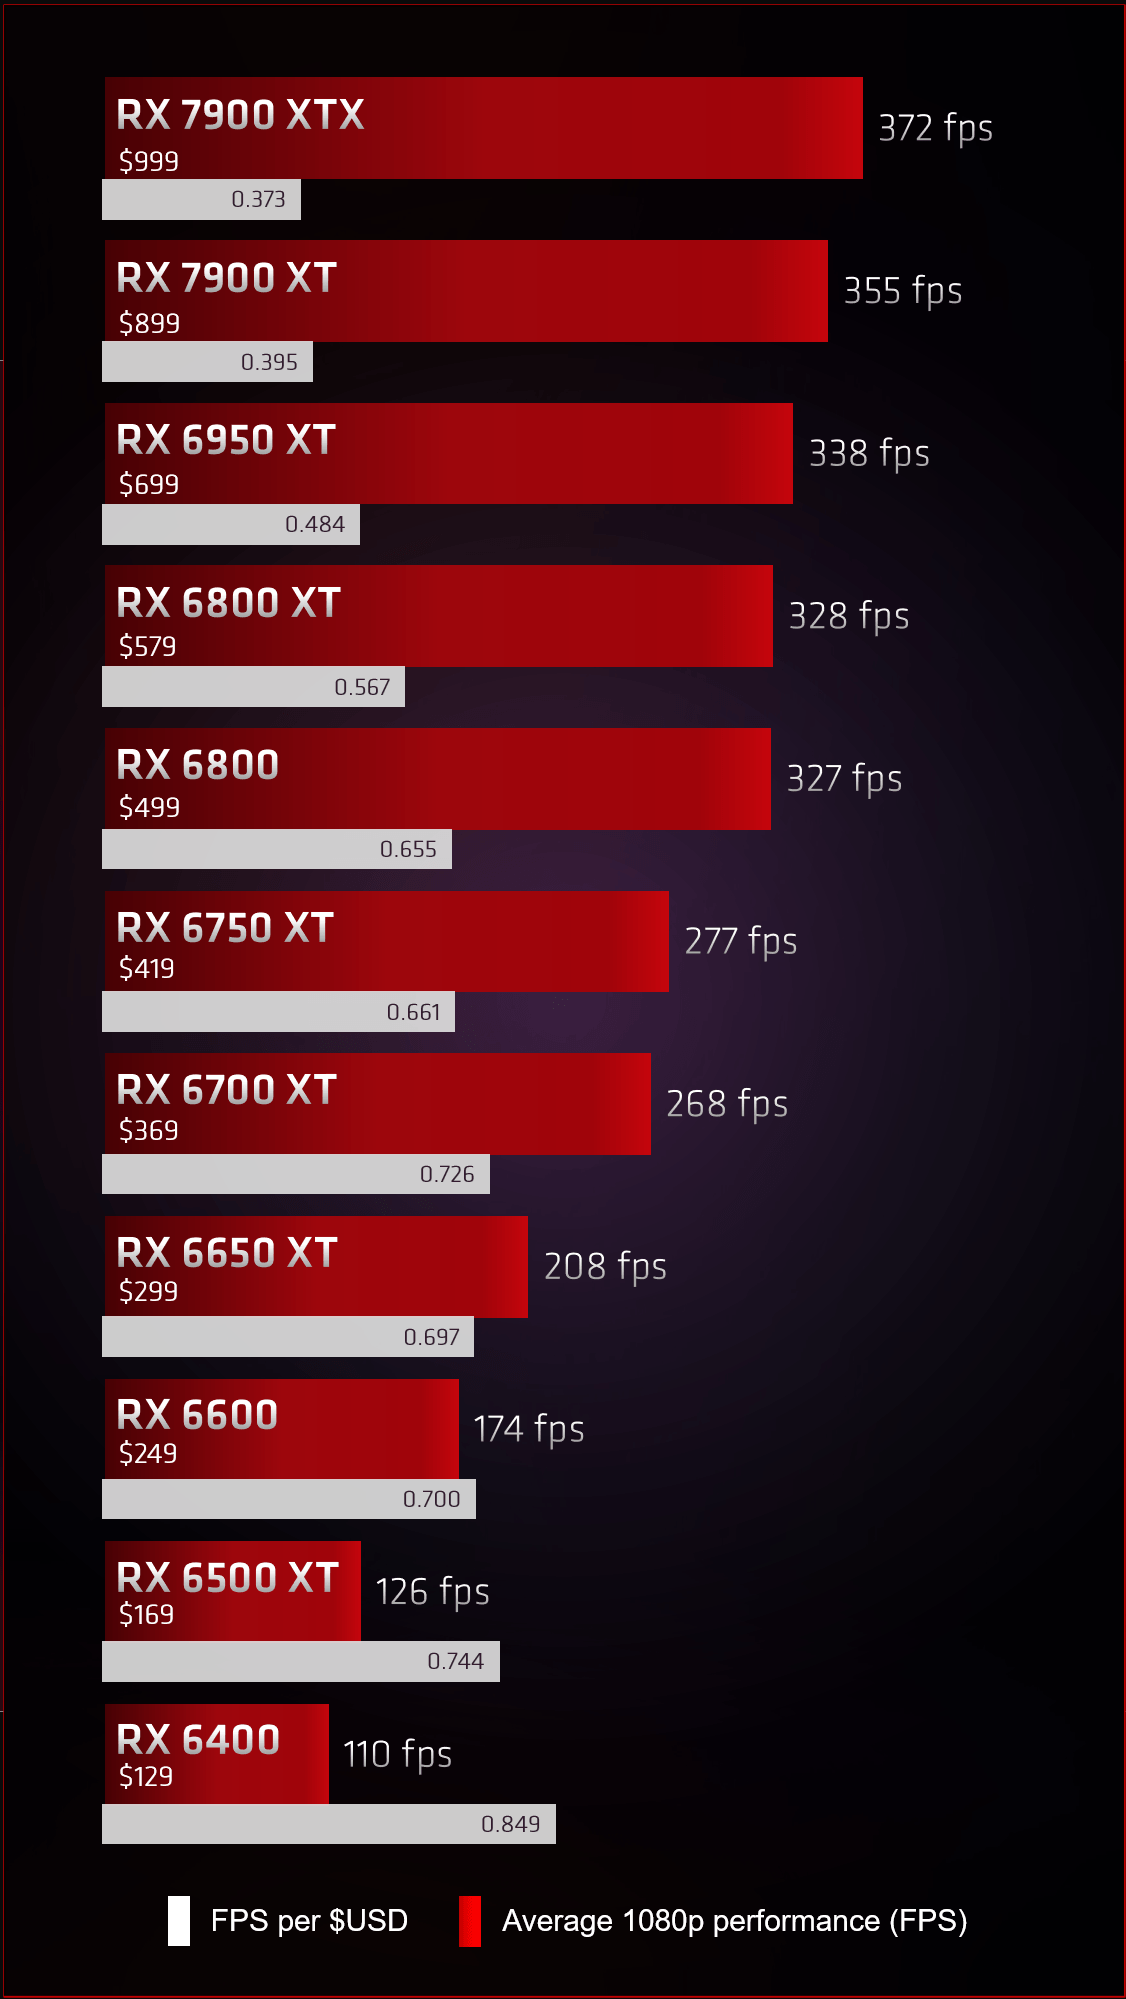 Family fight: AMD Radeon RX 7900 XT is up to 7% faster than RX 6950 XT but  costs 28% more 